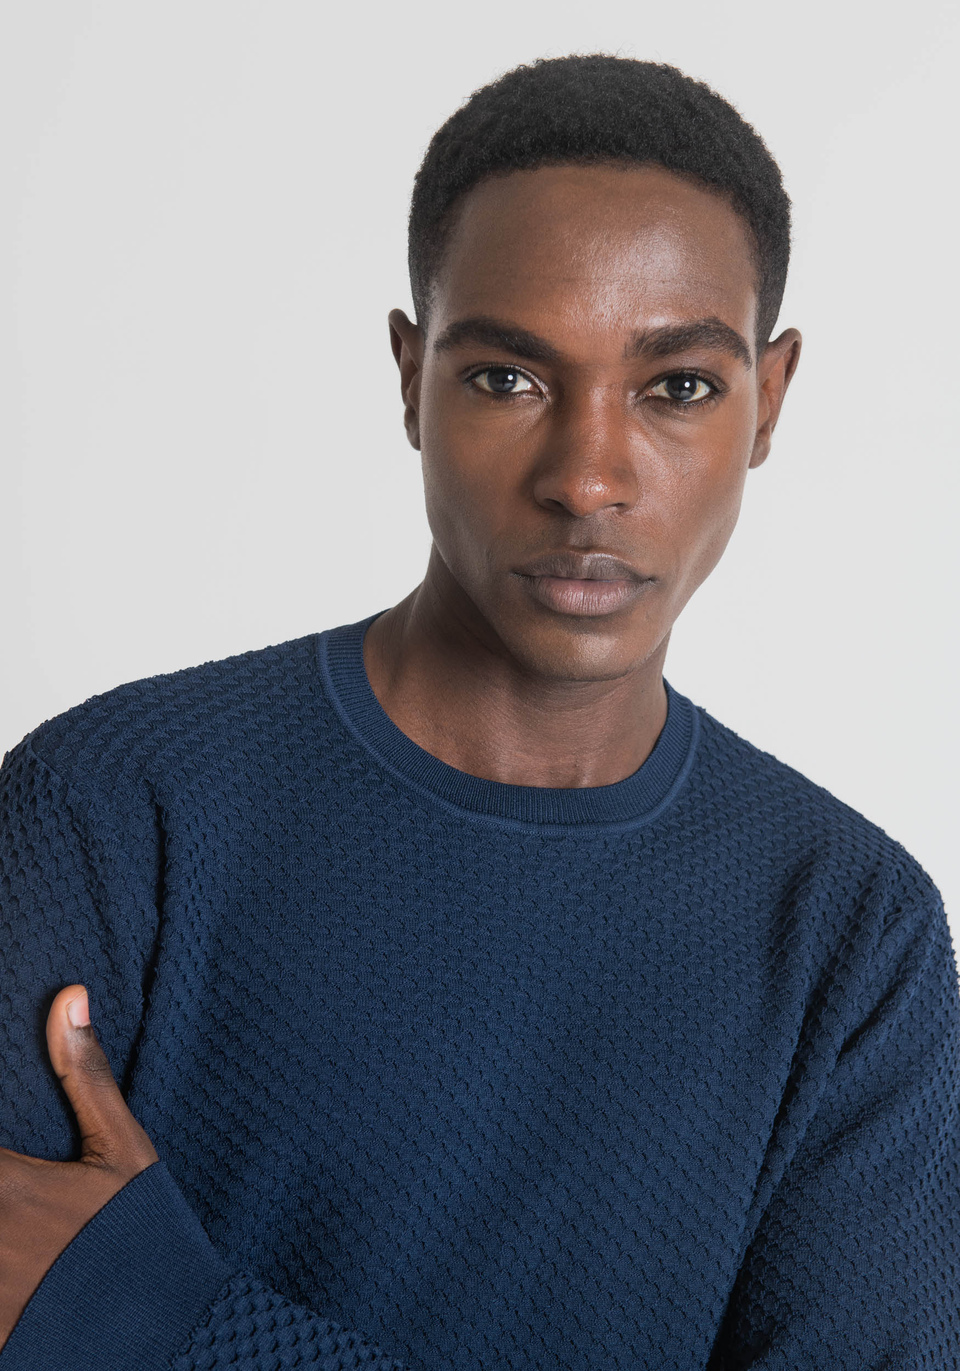 SLIM-FIT SWEATER IN VISCOSE-BLEND YARN WITH HONEYCOMB KNIT - Antony Morato Online Shop